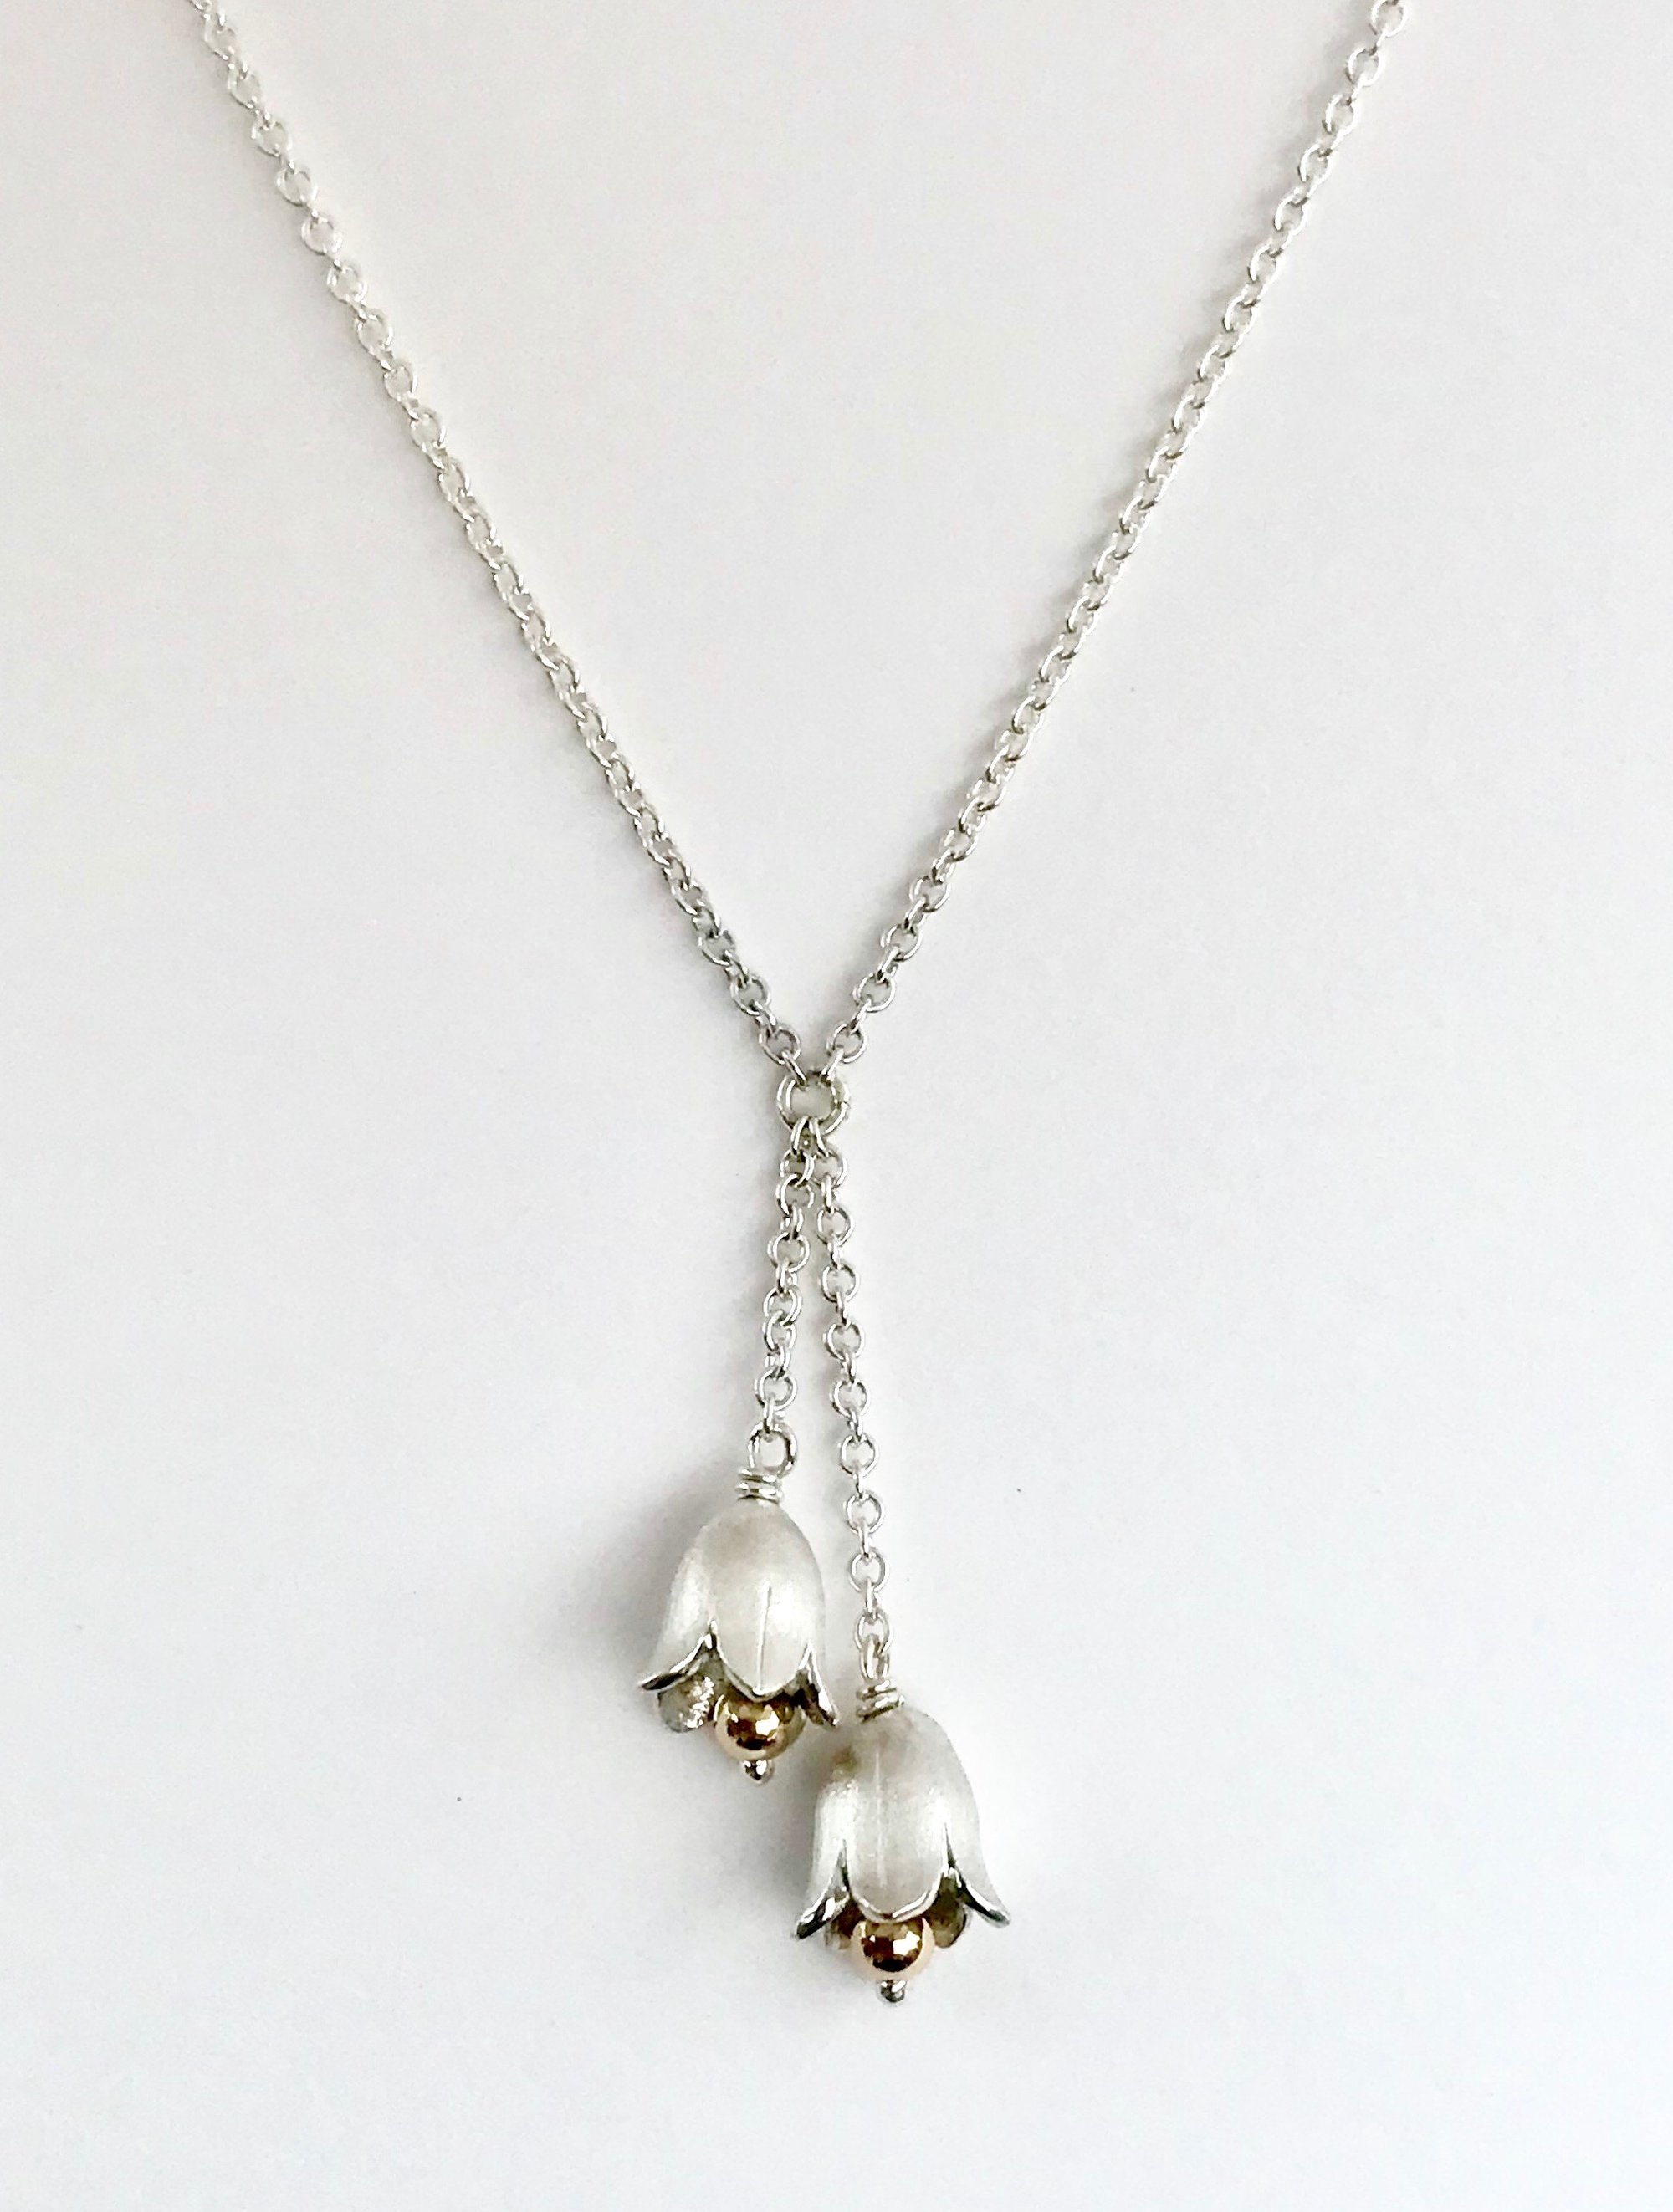 Lily of The Valley Necklace | Rutheny Jewelry & Sculpture